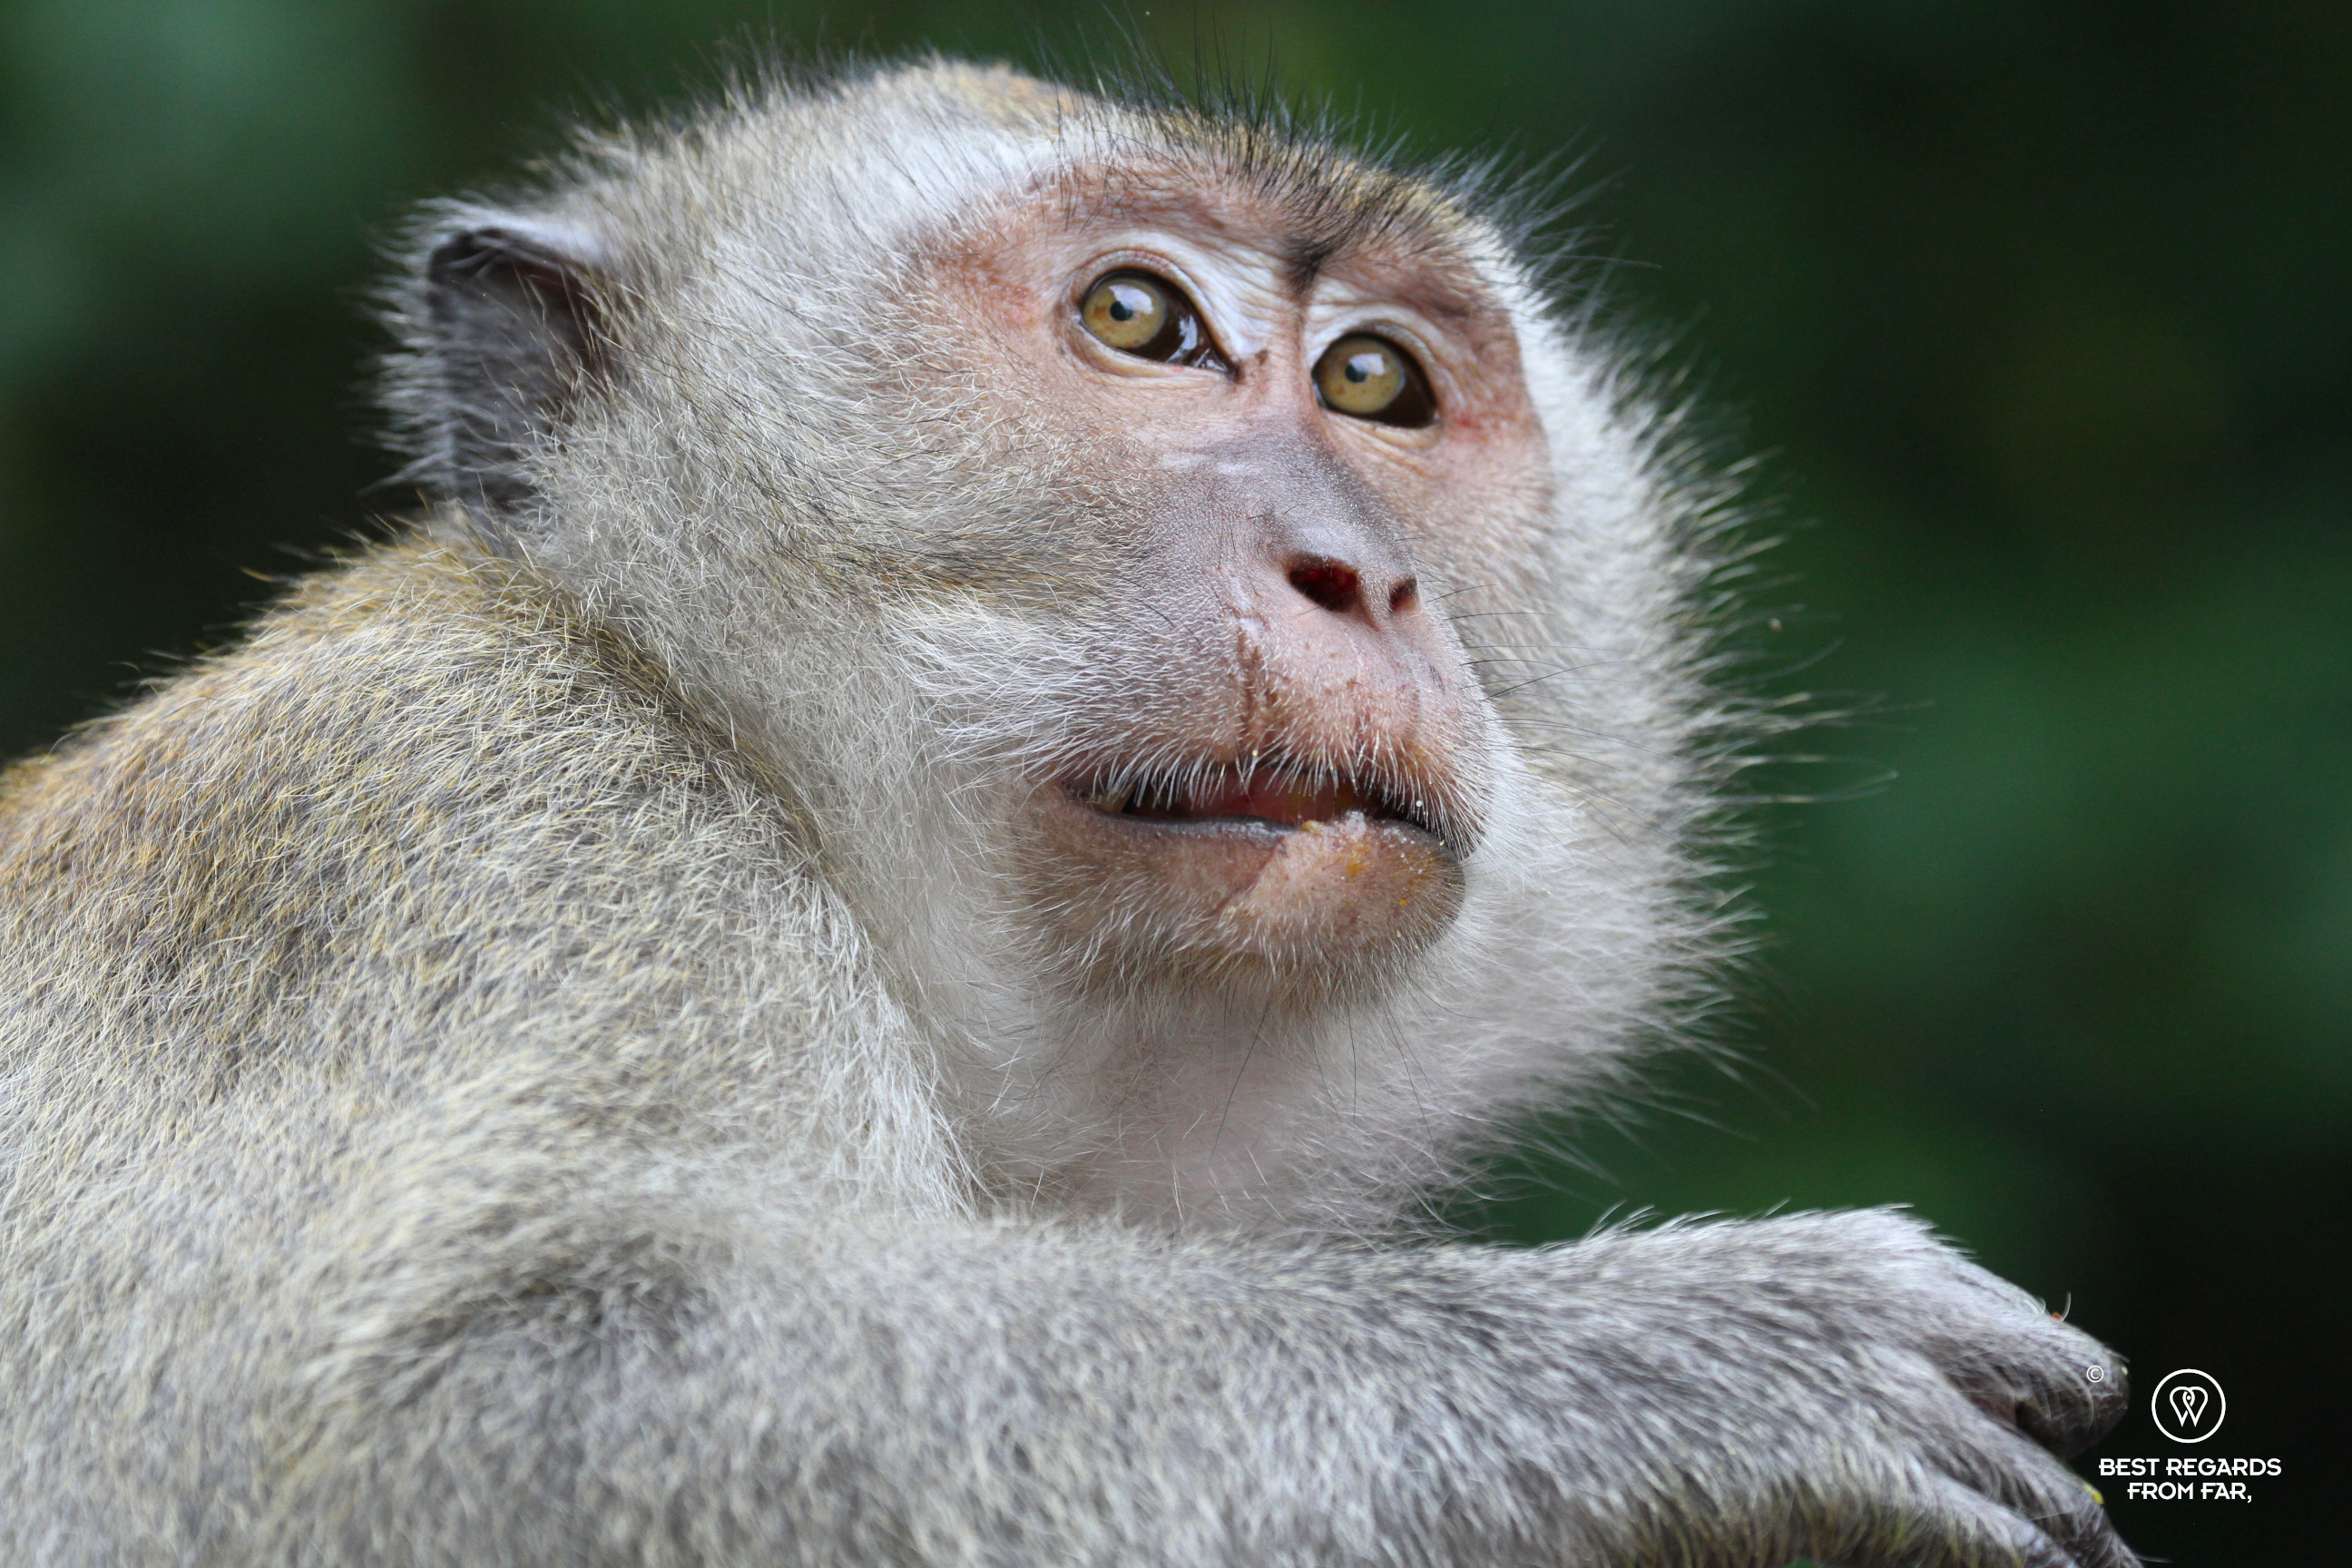 Long-tailed macaque with a scar on his lips.